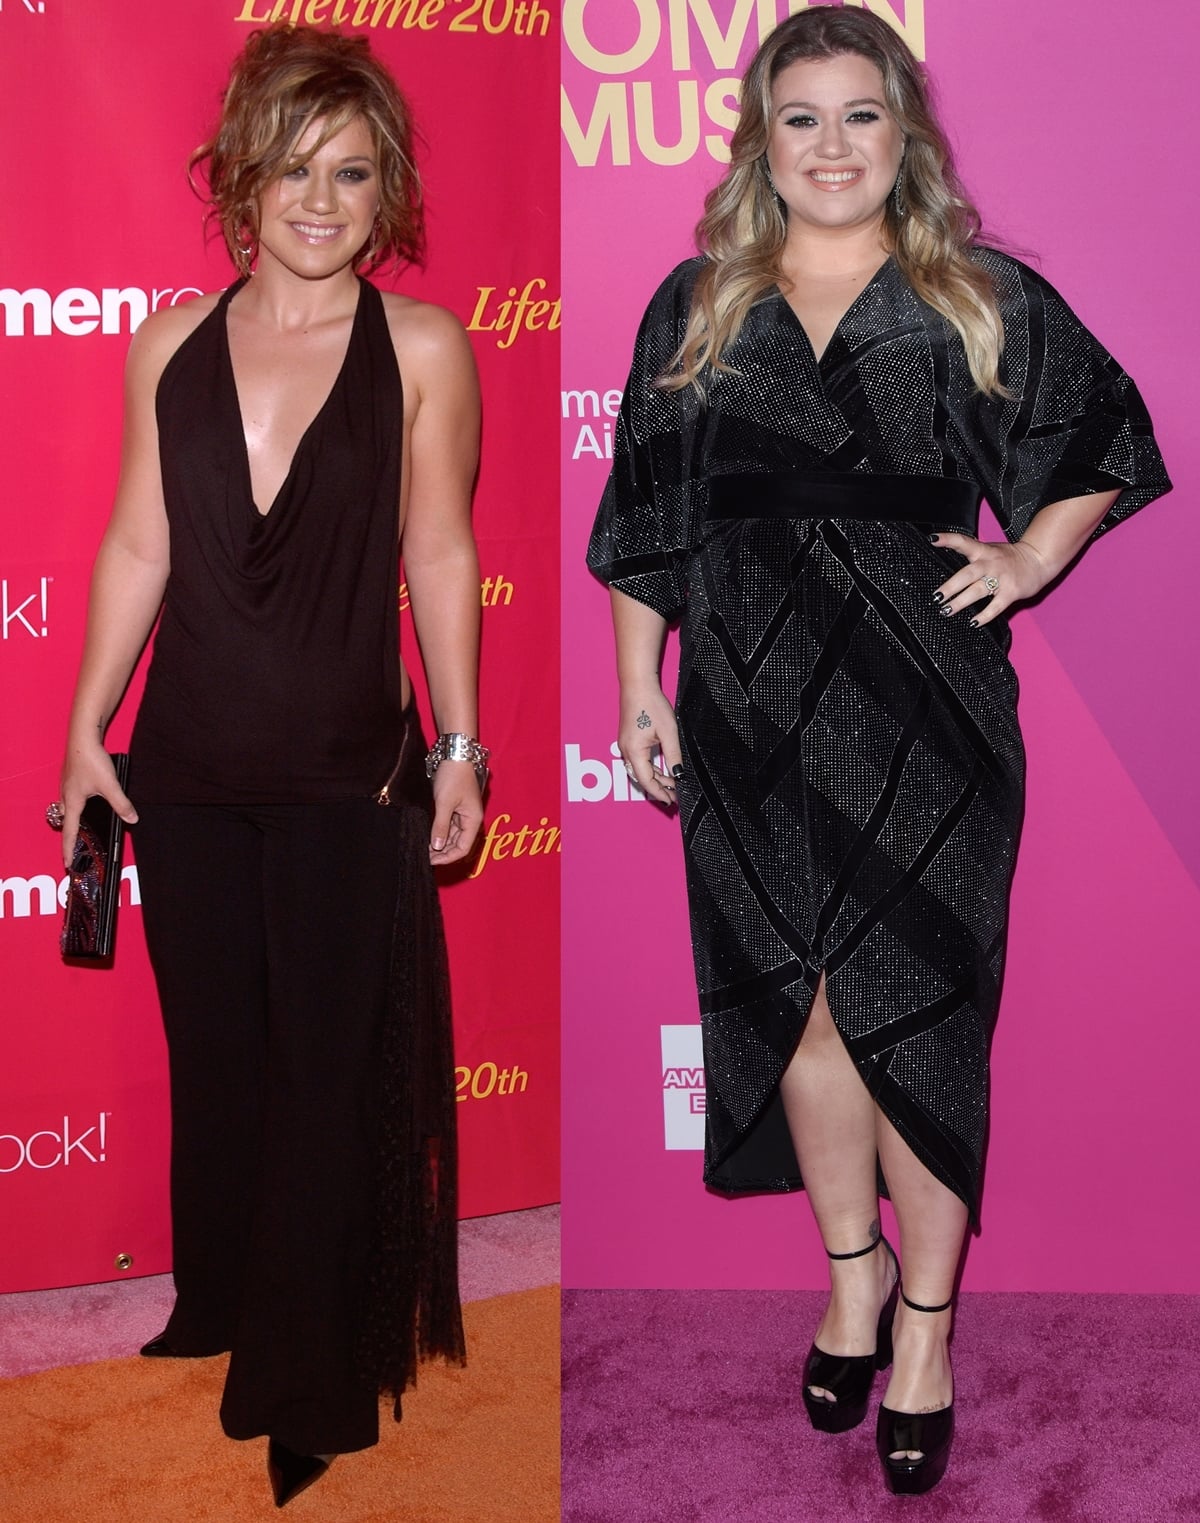 Singer Kelly Clarkson gained a lot of weight between 2004 (L) and 2017